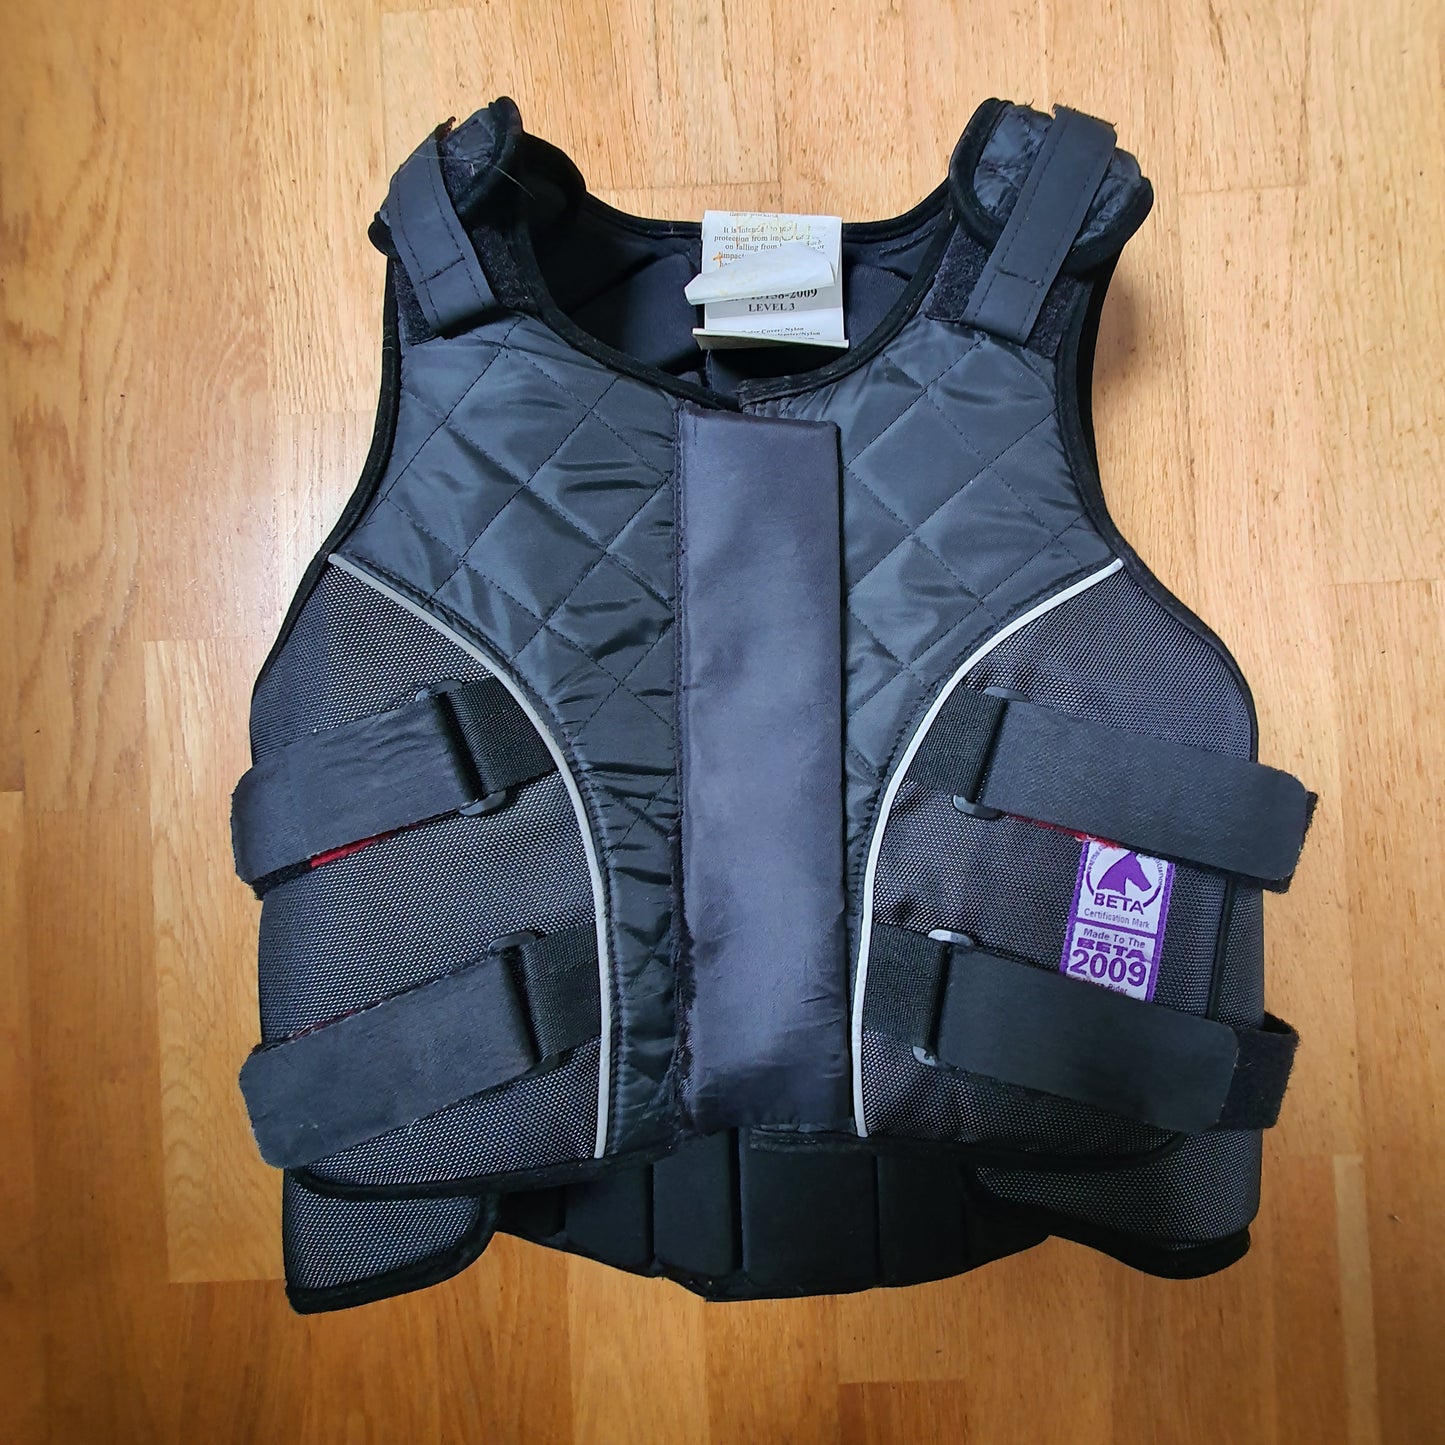 Smart Rider kids body protector (boys and girls)